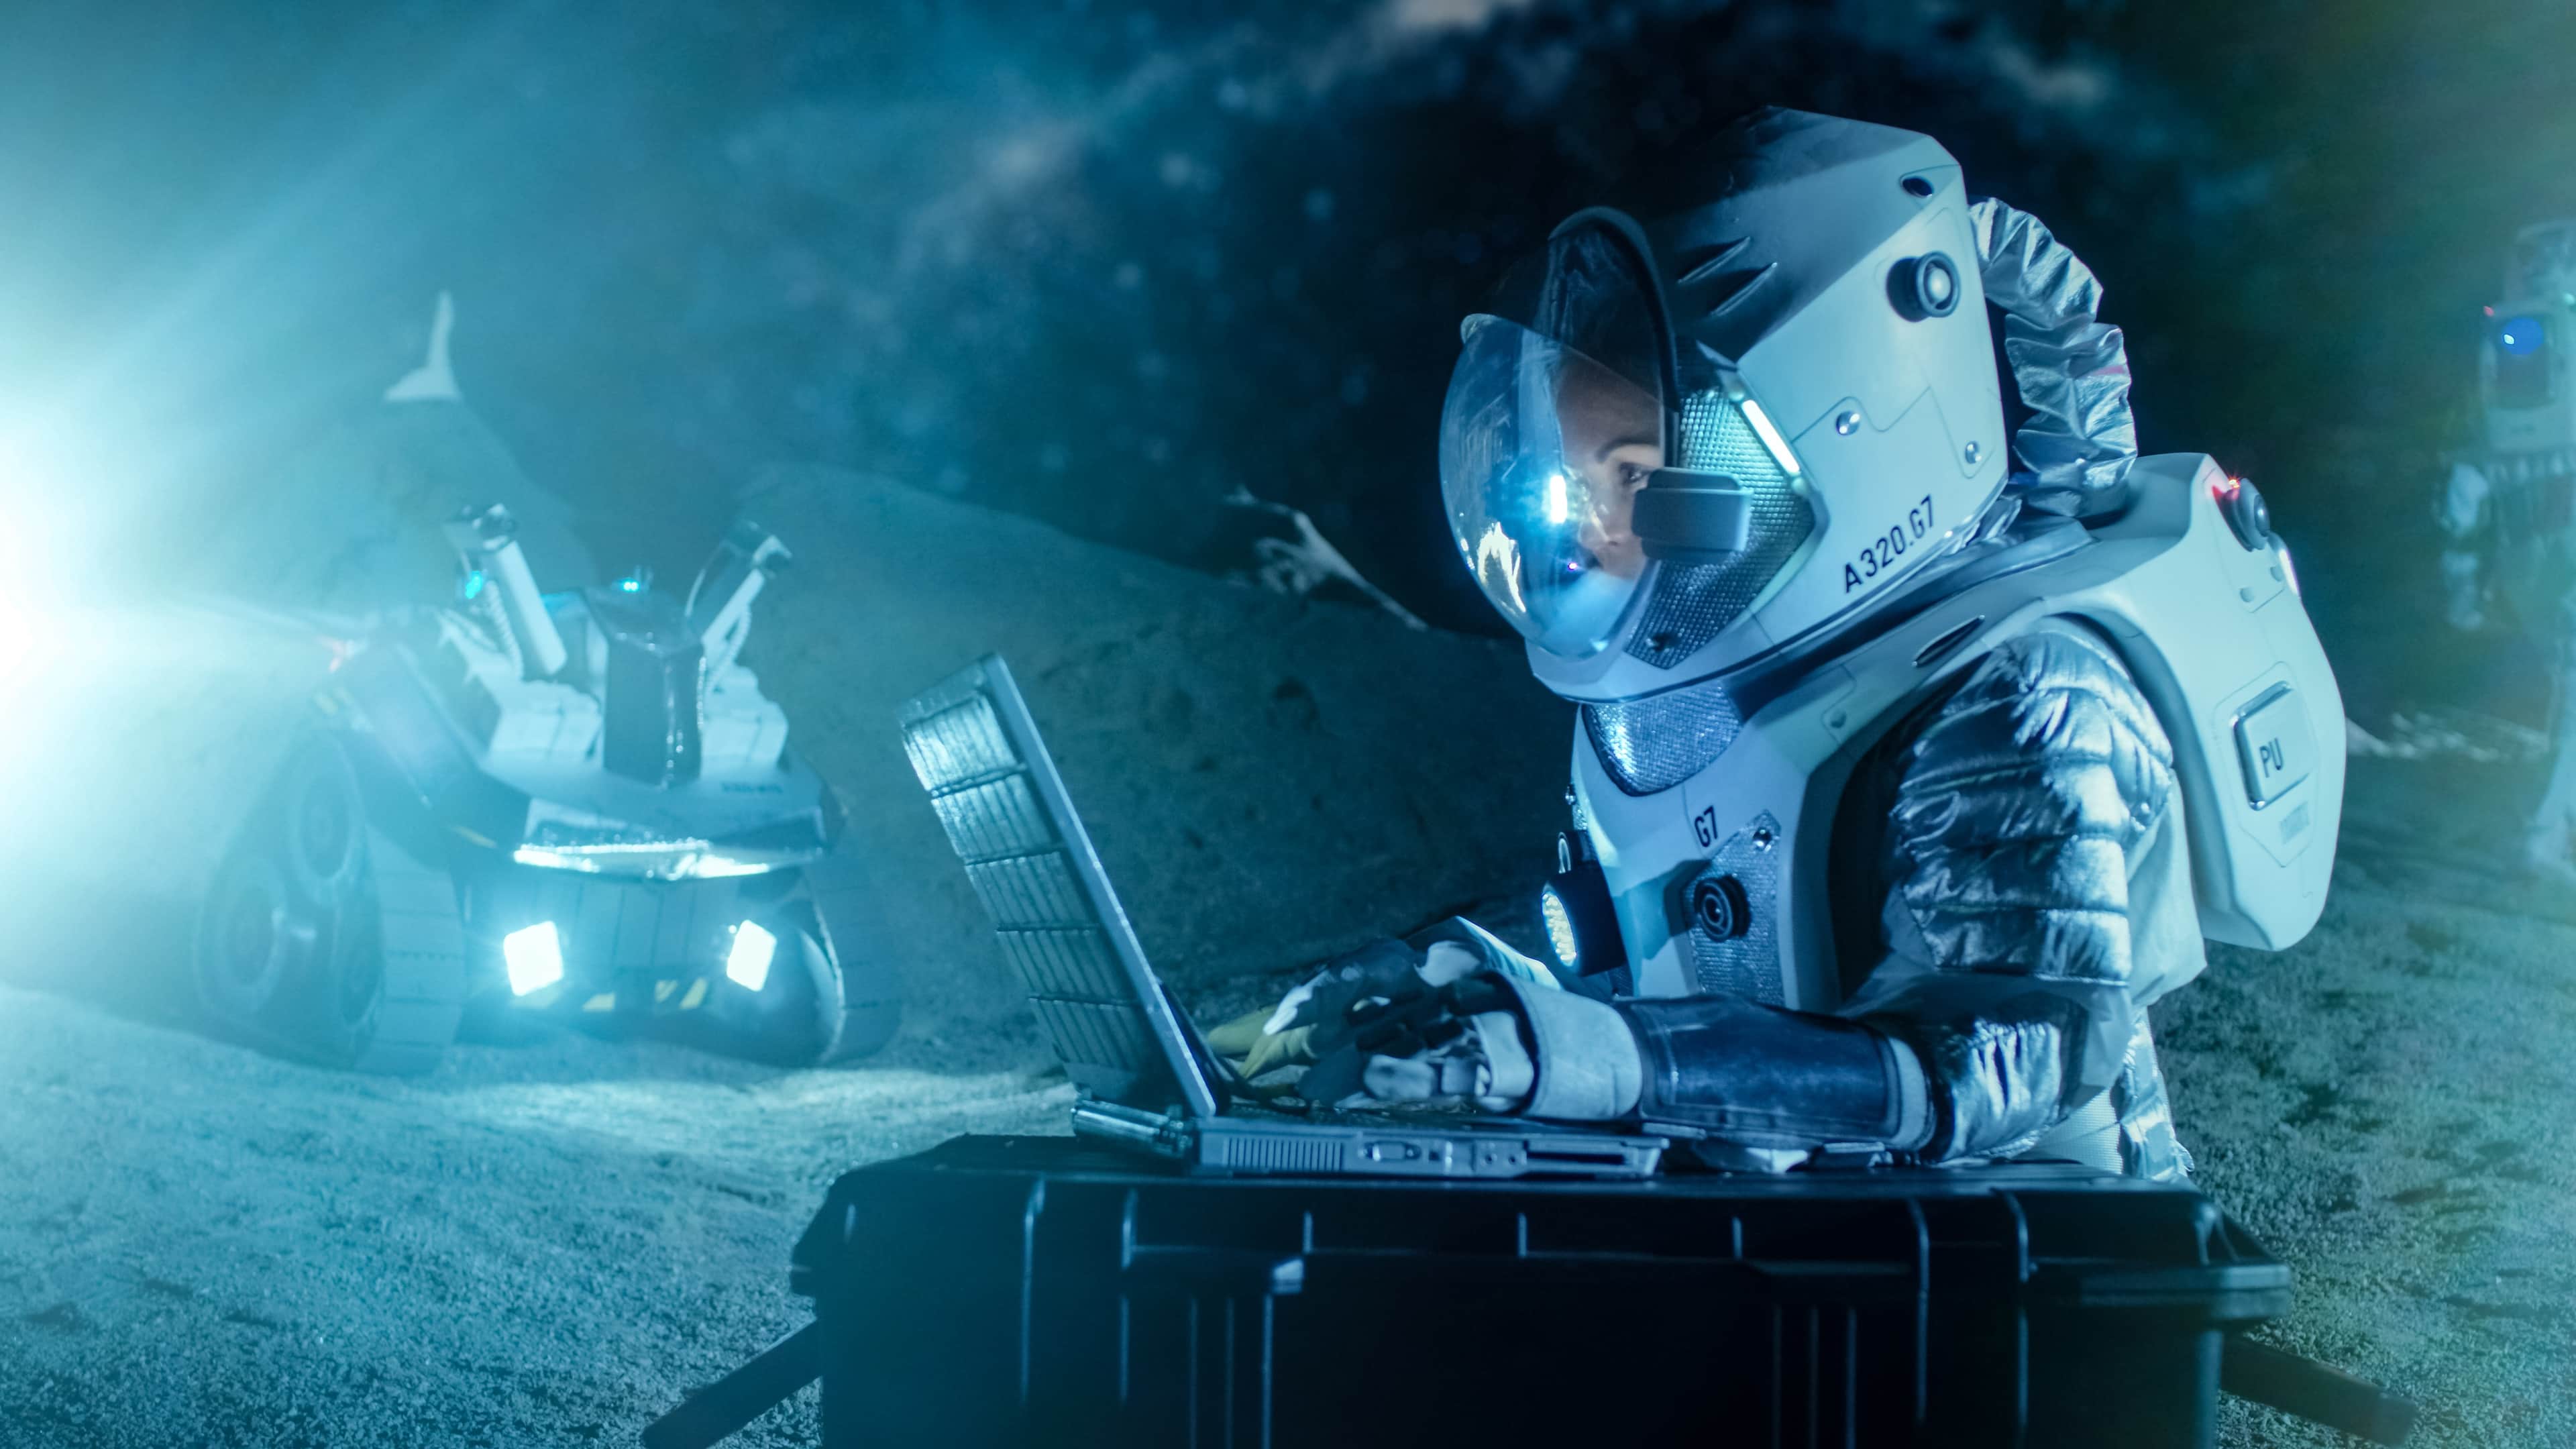 Female Astronaut Wearing Space Suit Works on a Laptop, Exploring Newly Discovered Planet, Communicating with the Earth. In the Background Her Crew Member and Space Habitat. Colonization Concept.